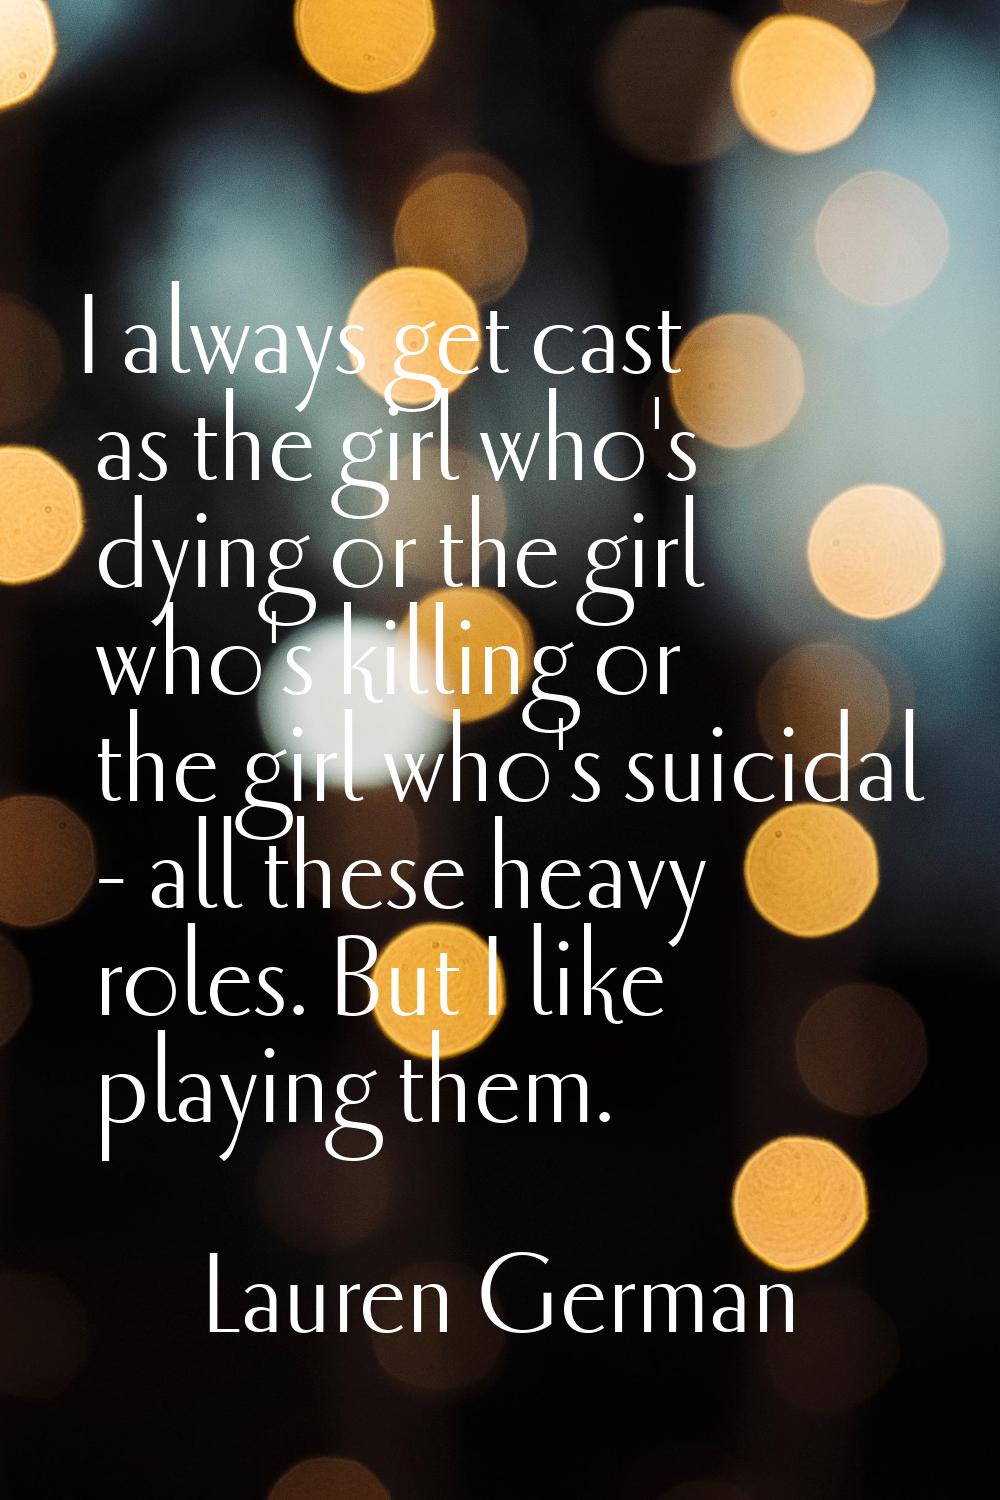 I always get cast as the girl who's dying or the girl who's killing or the girl who's suicidal - al